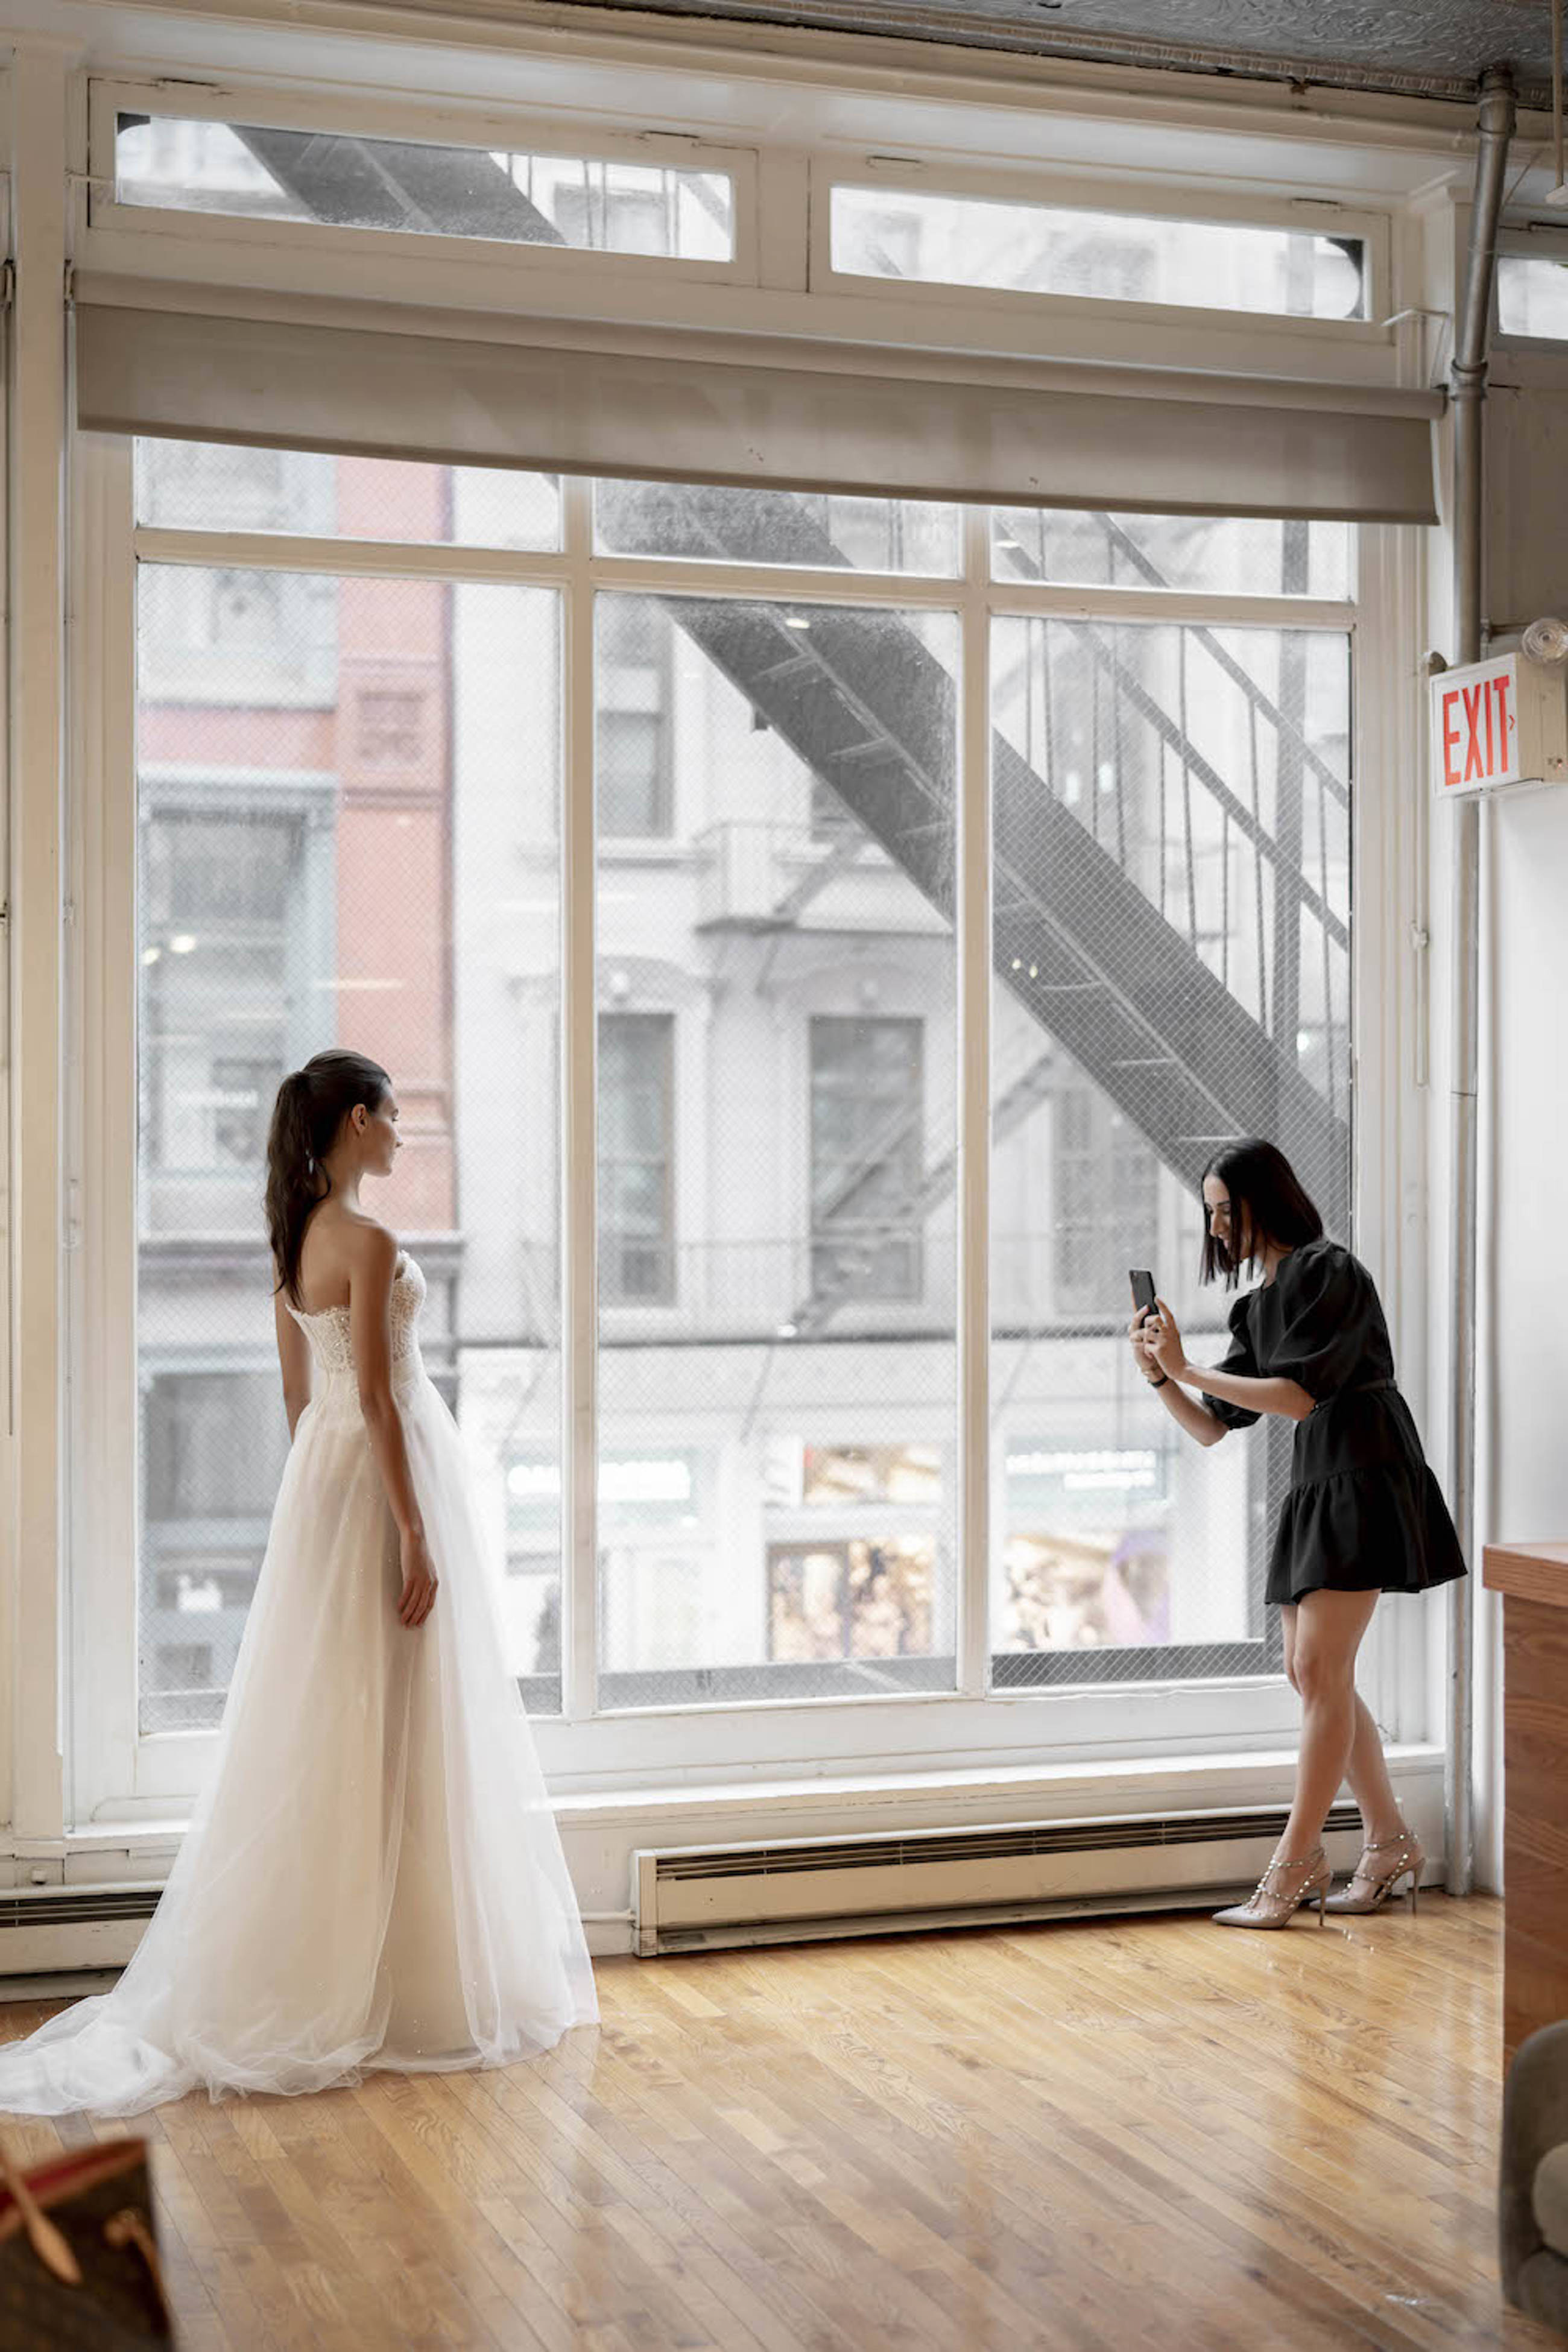 The New Wedding Fashion Trends Brides Need To Know. Desktop Image